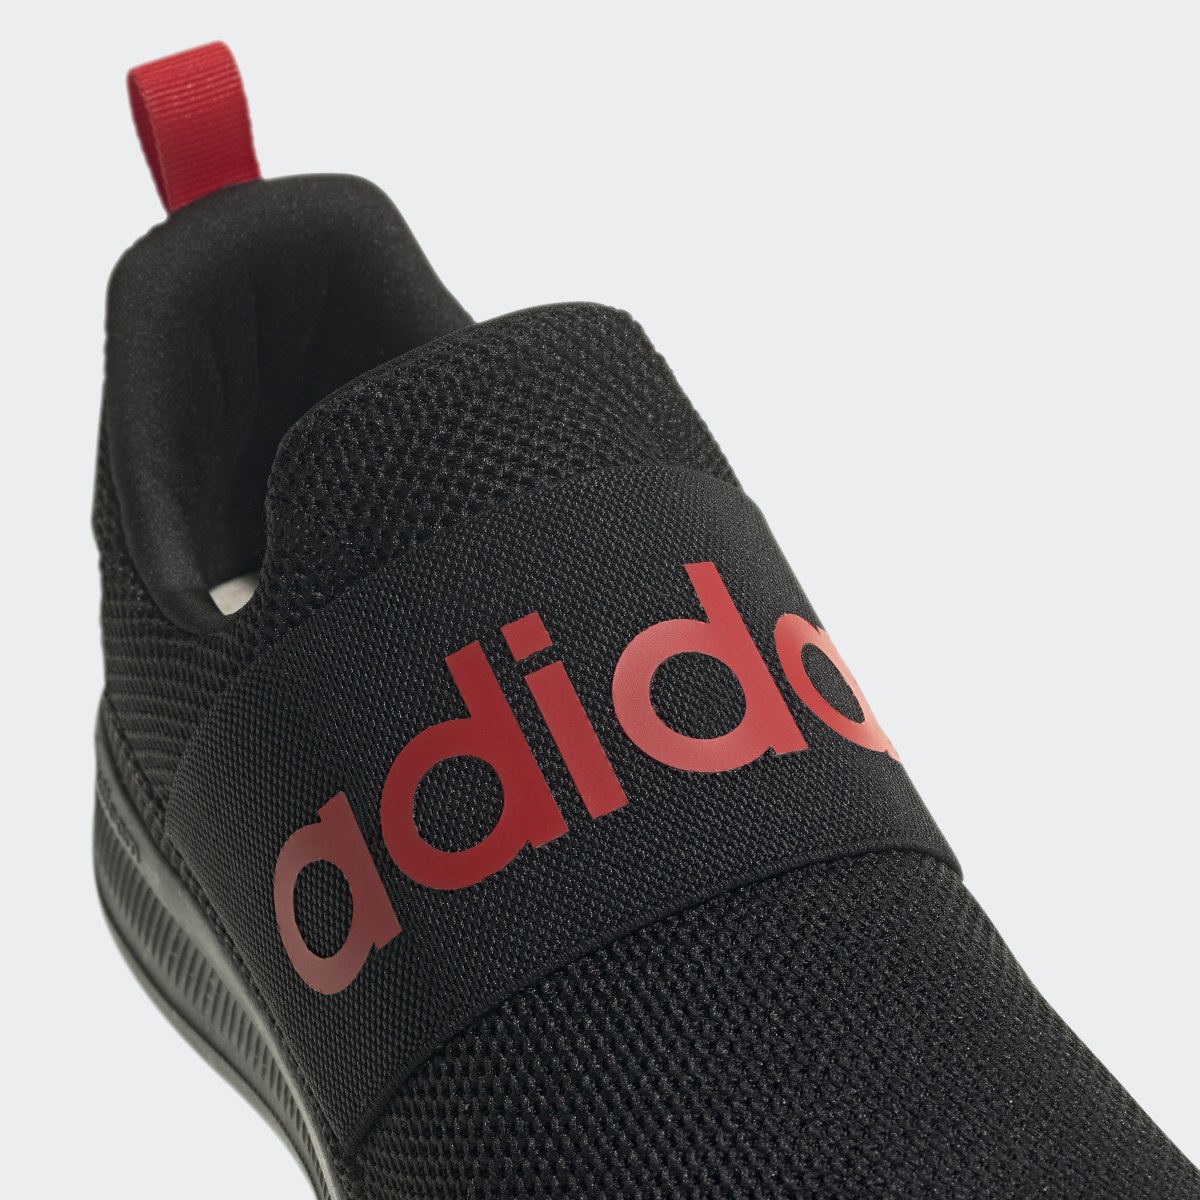 Adidas Lite Racer Adapt 4.0 Shoes. 10